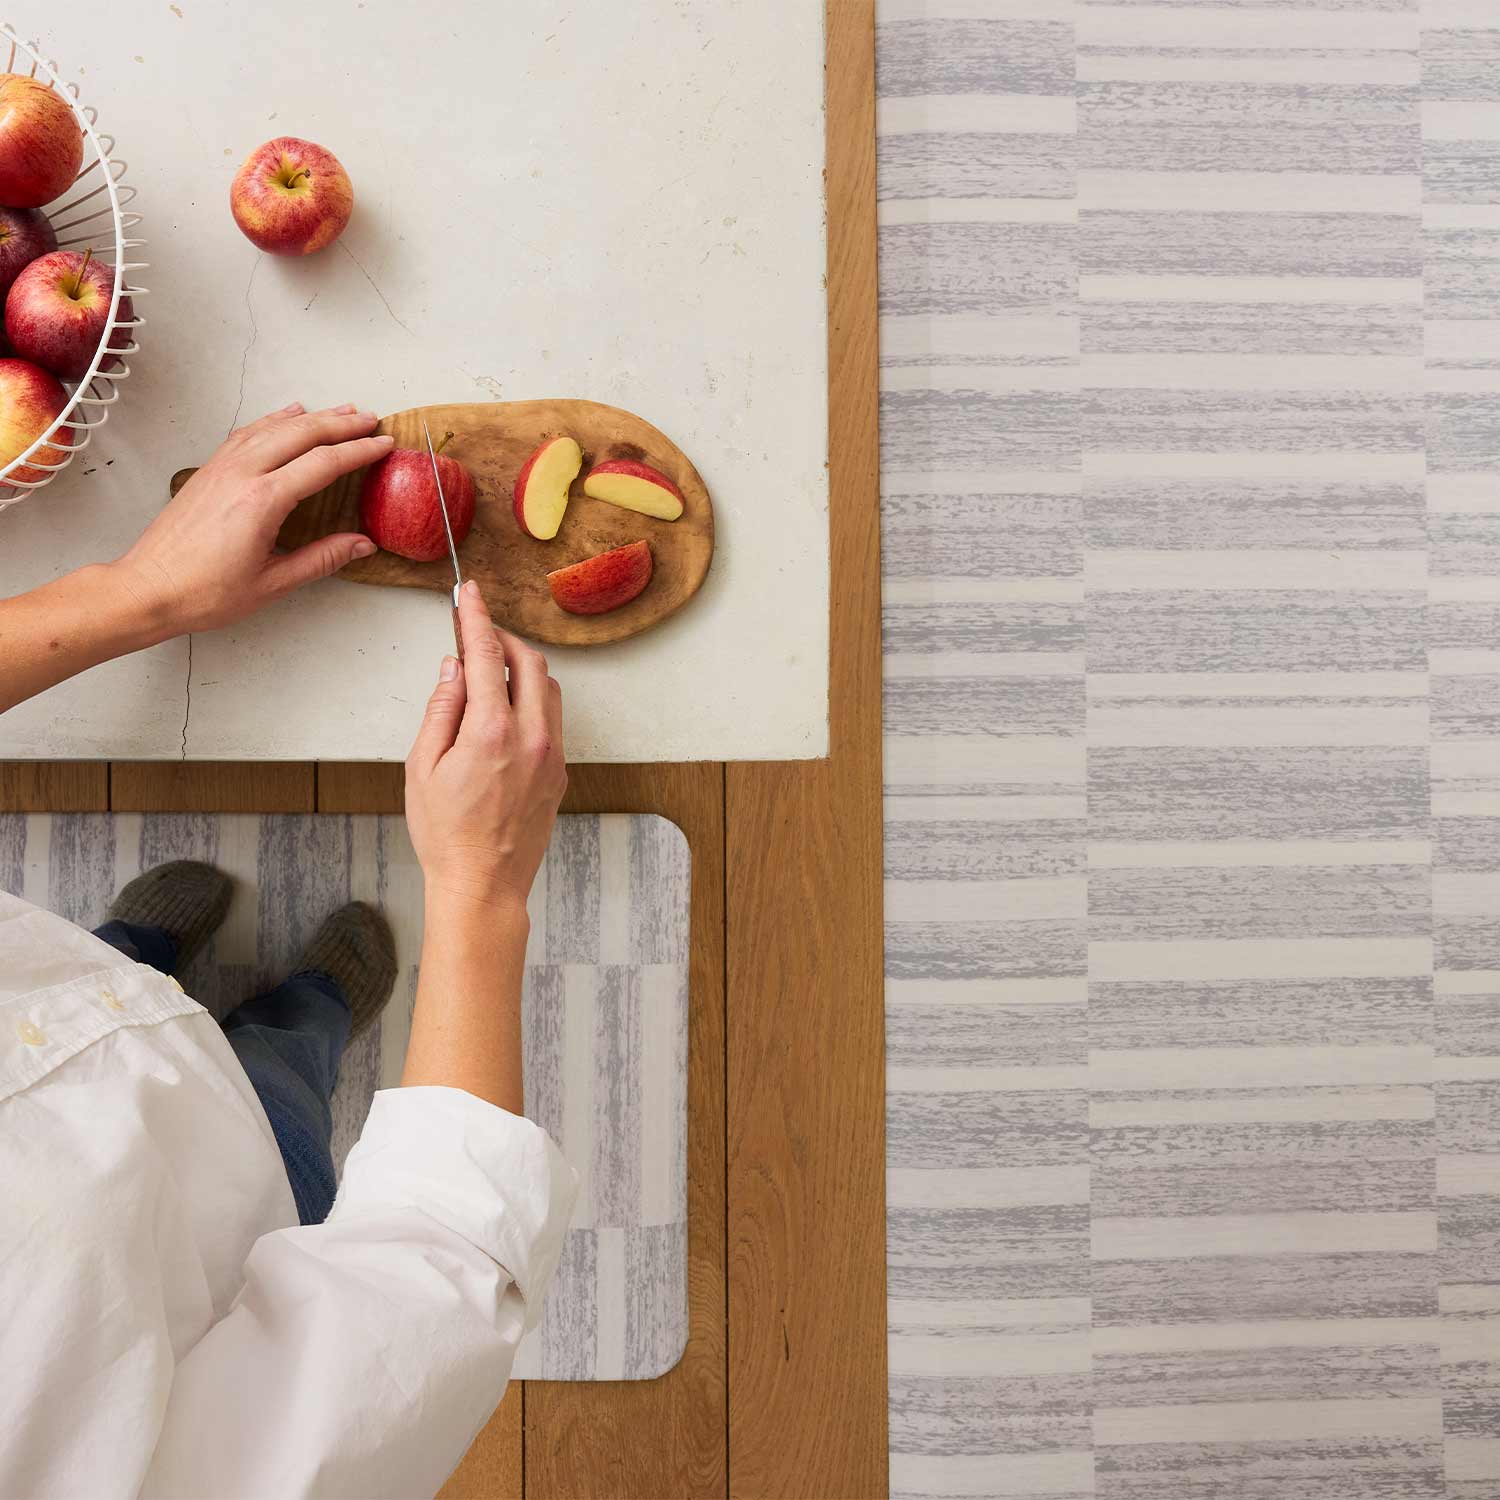 sutton stripe heather gray inverted stripe standing mat shown from in sizes 22x54 and 30x108 with woman standing on the mat at kitchen counter cutting apples